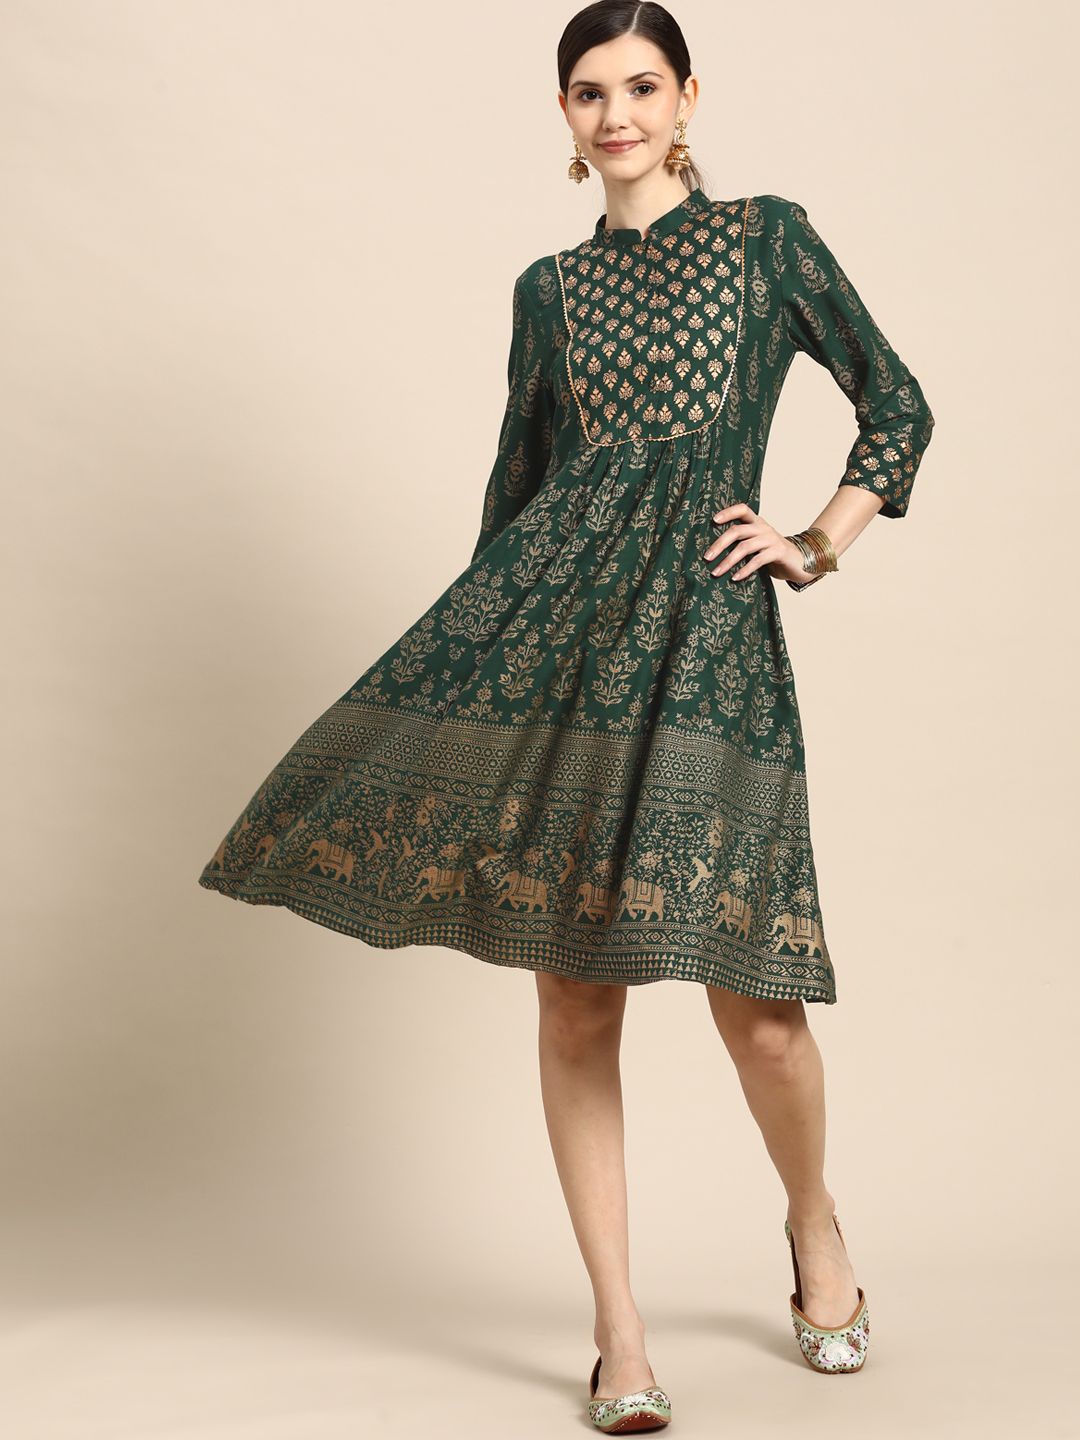 Sangria Teal & Golden Ethnic Motifs A-Line Midi Dress Price in India